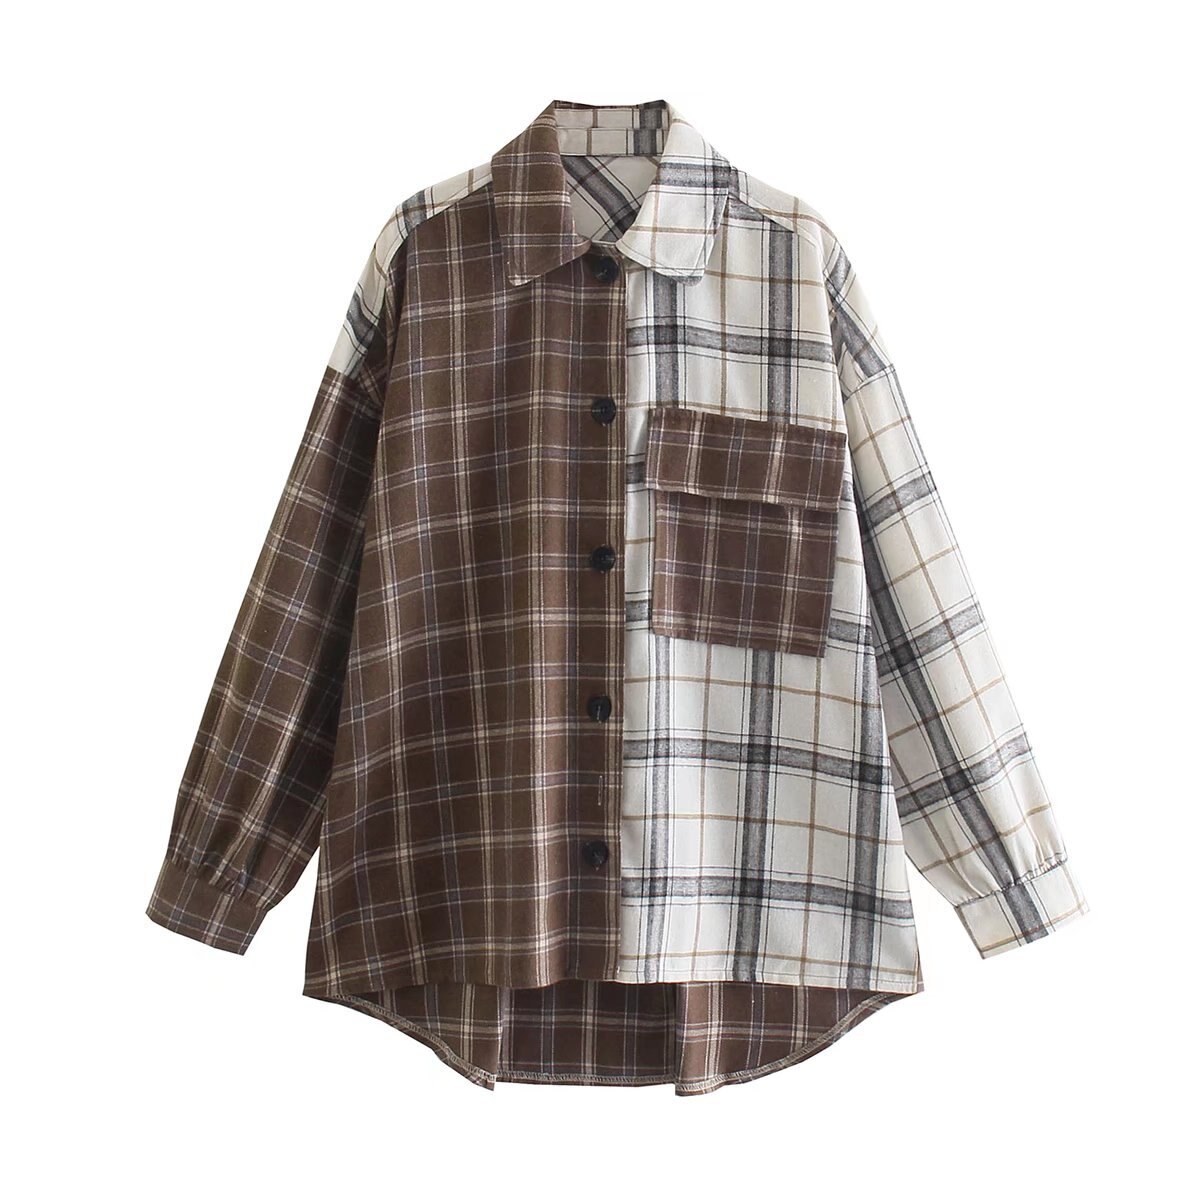 Christmas Gift Women Plaid Patchwork Sanding Shirt Casual Turn Down Collar Long Sleeve Pocket Single Breasted Loose Blouse Vintage Chic Top New